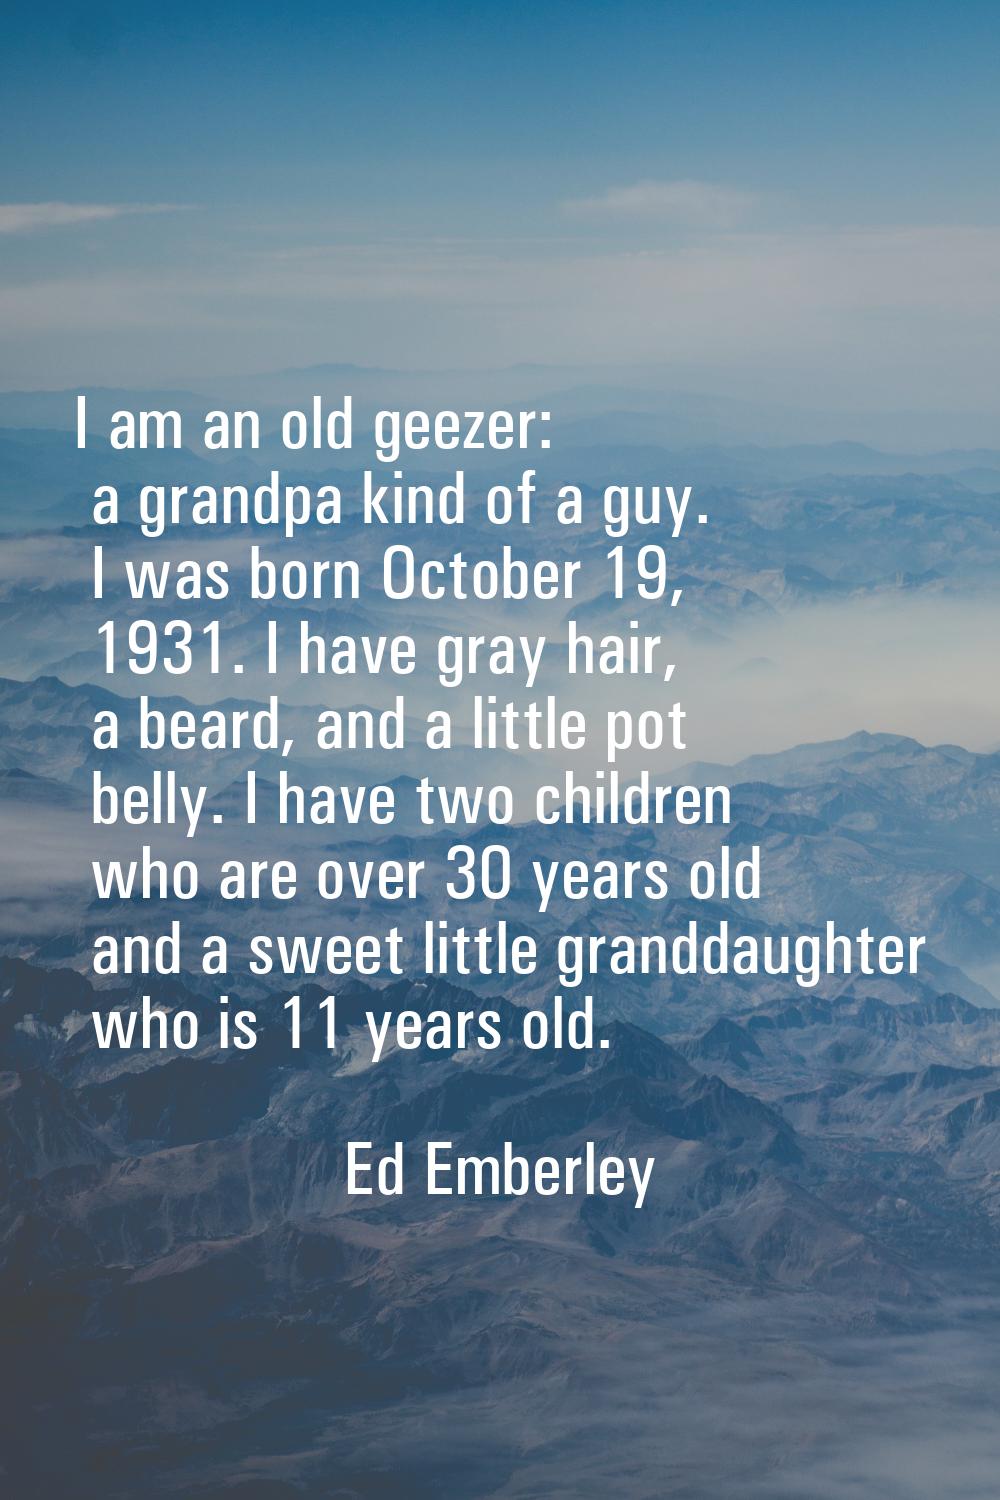 I am an old geezer: a grandpa kind of a guy. I was born October 19, 1931. I have gray hair, a beard